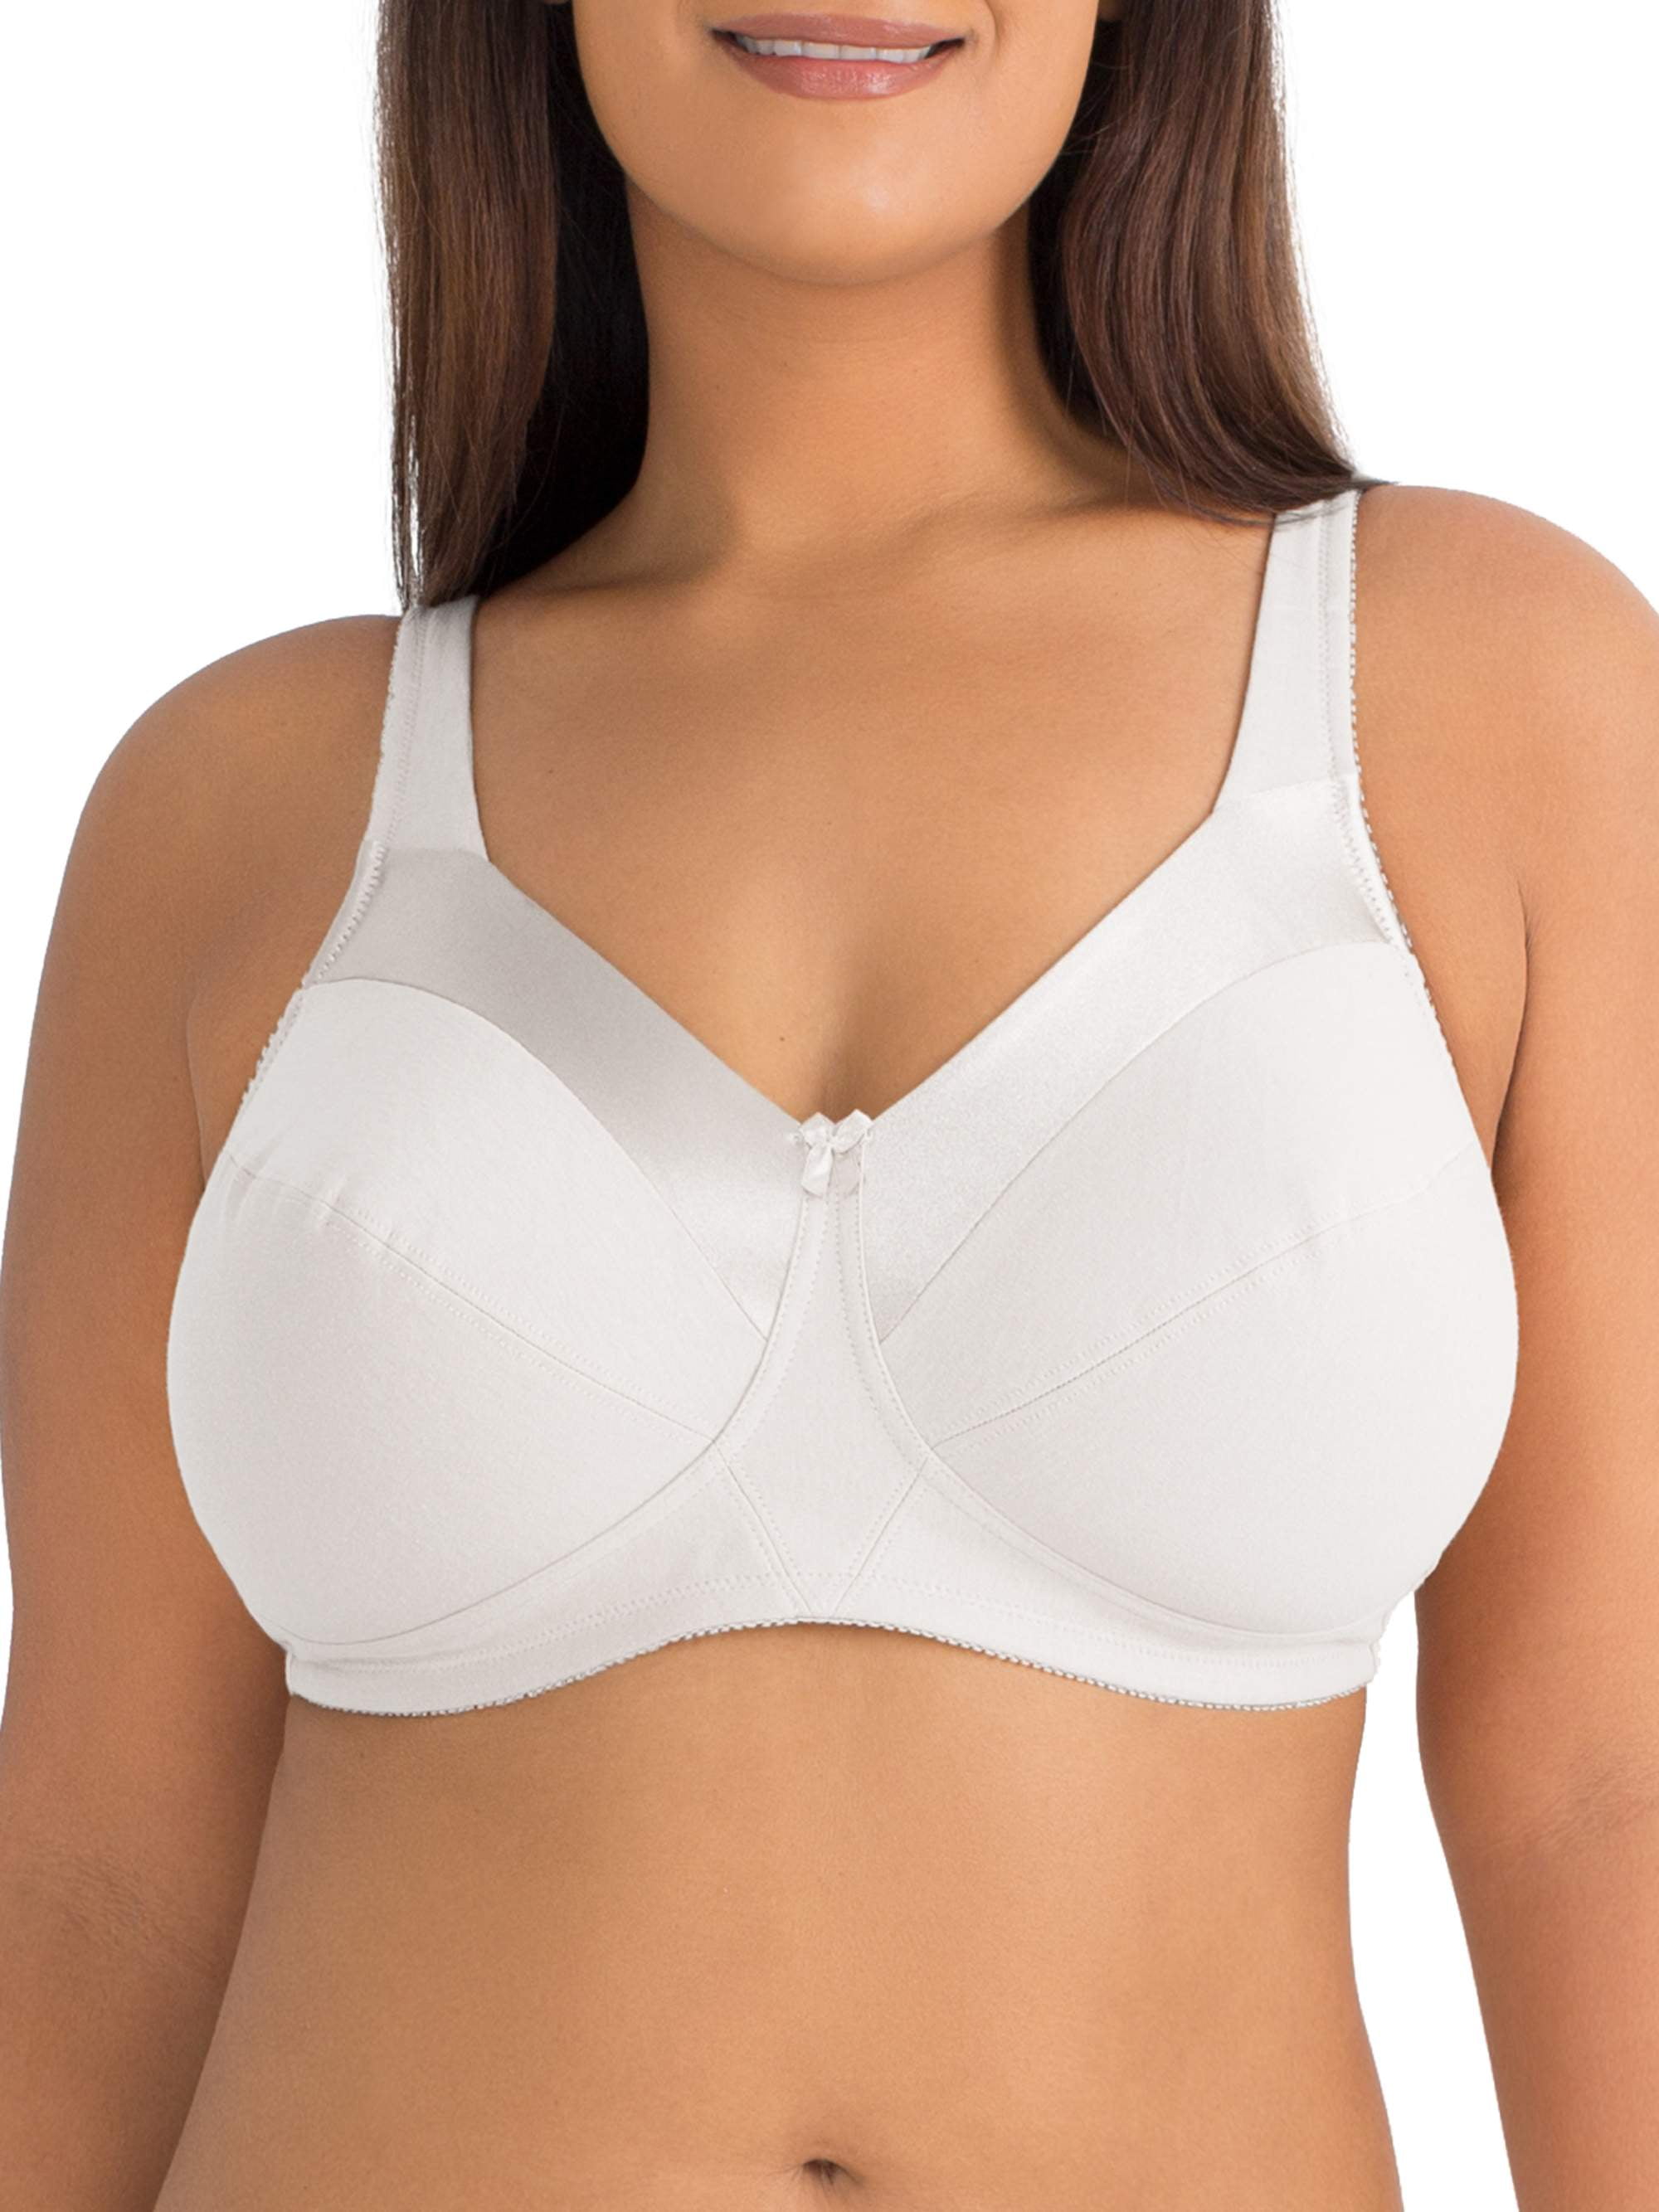 Fruit of the Loom Women's Cotton Double Layered Wire Free Sports Bra -  Price History